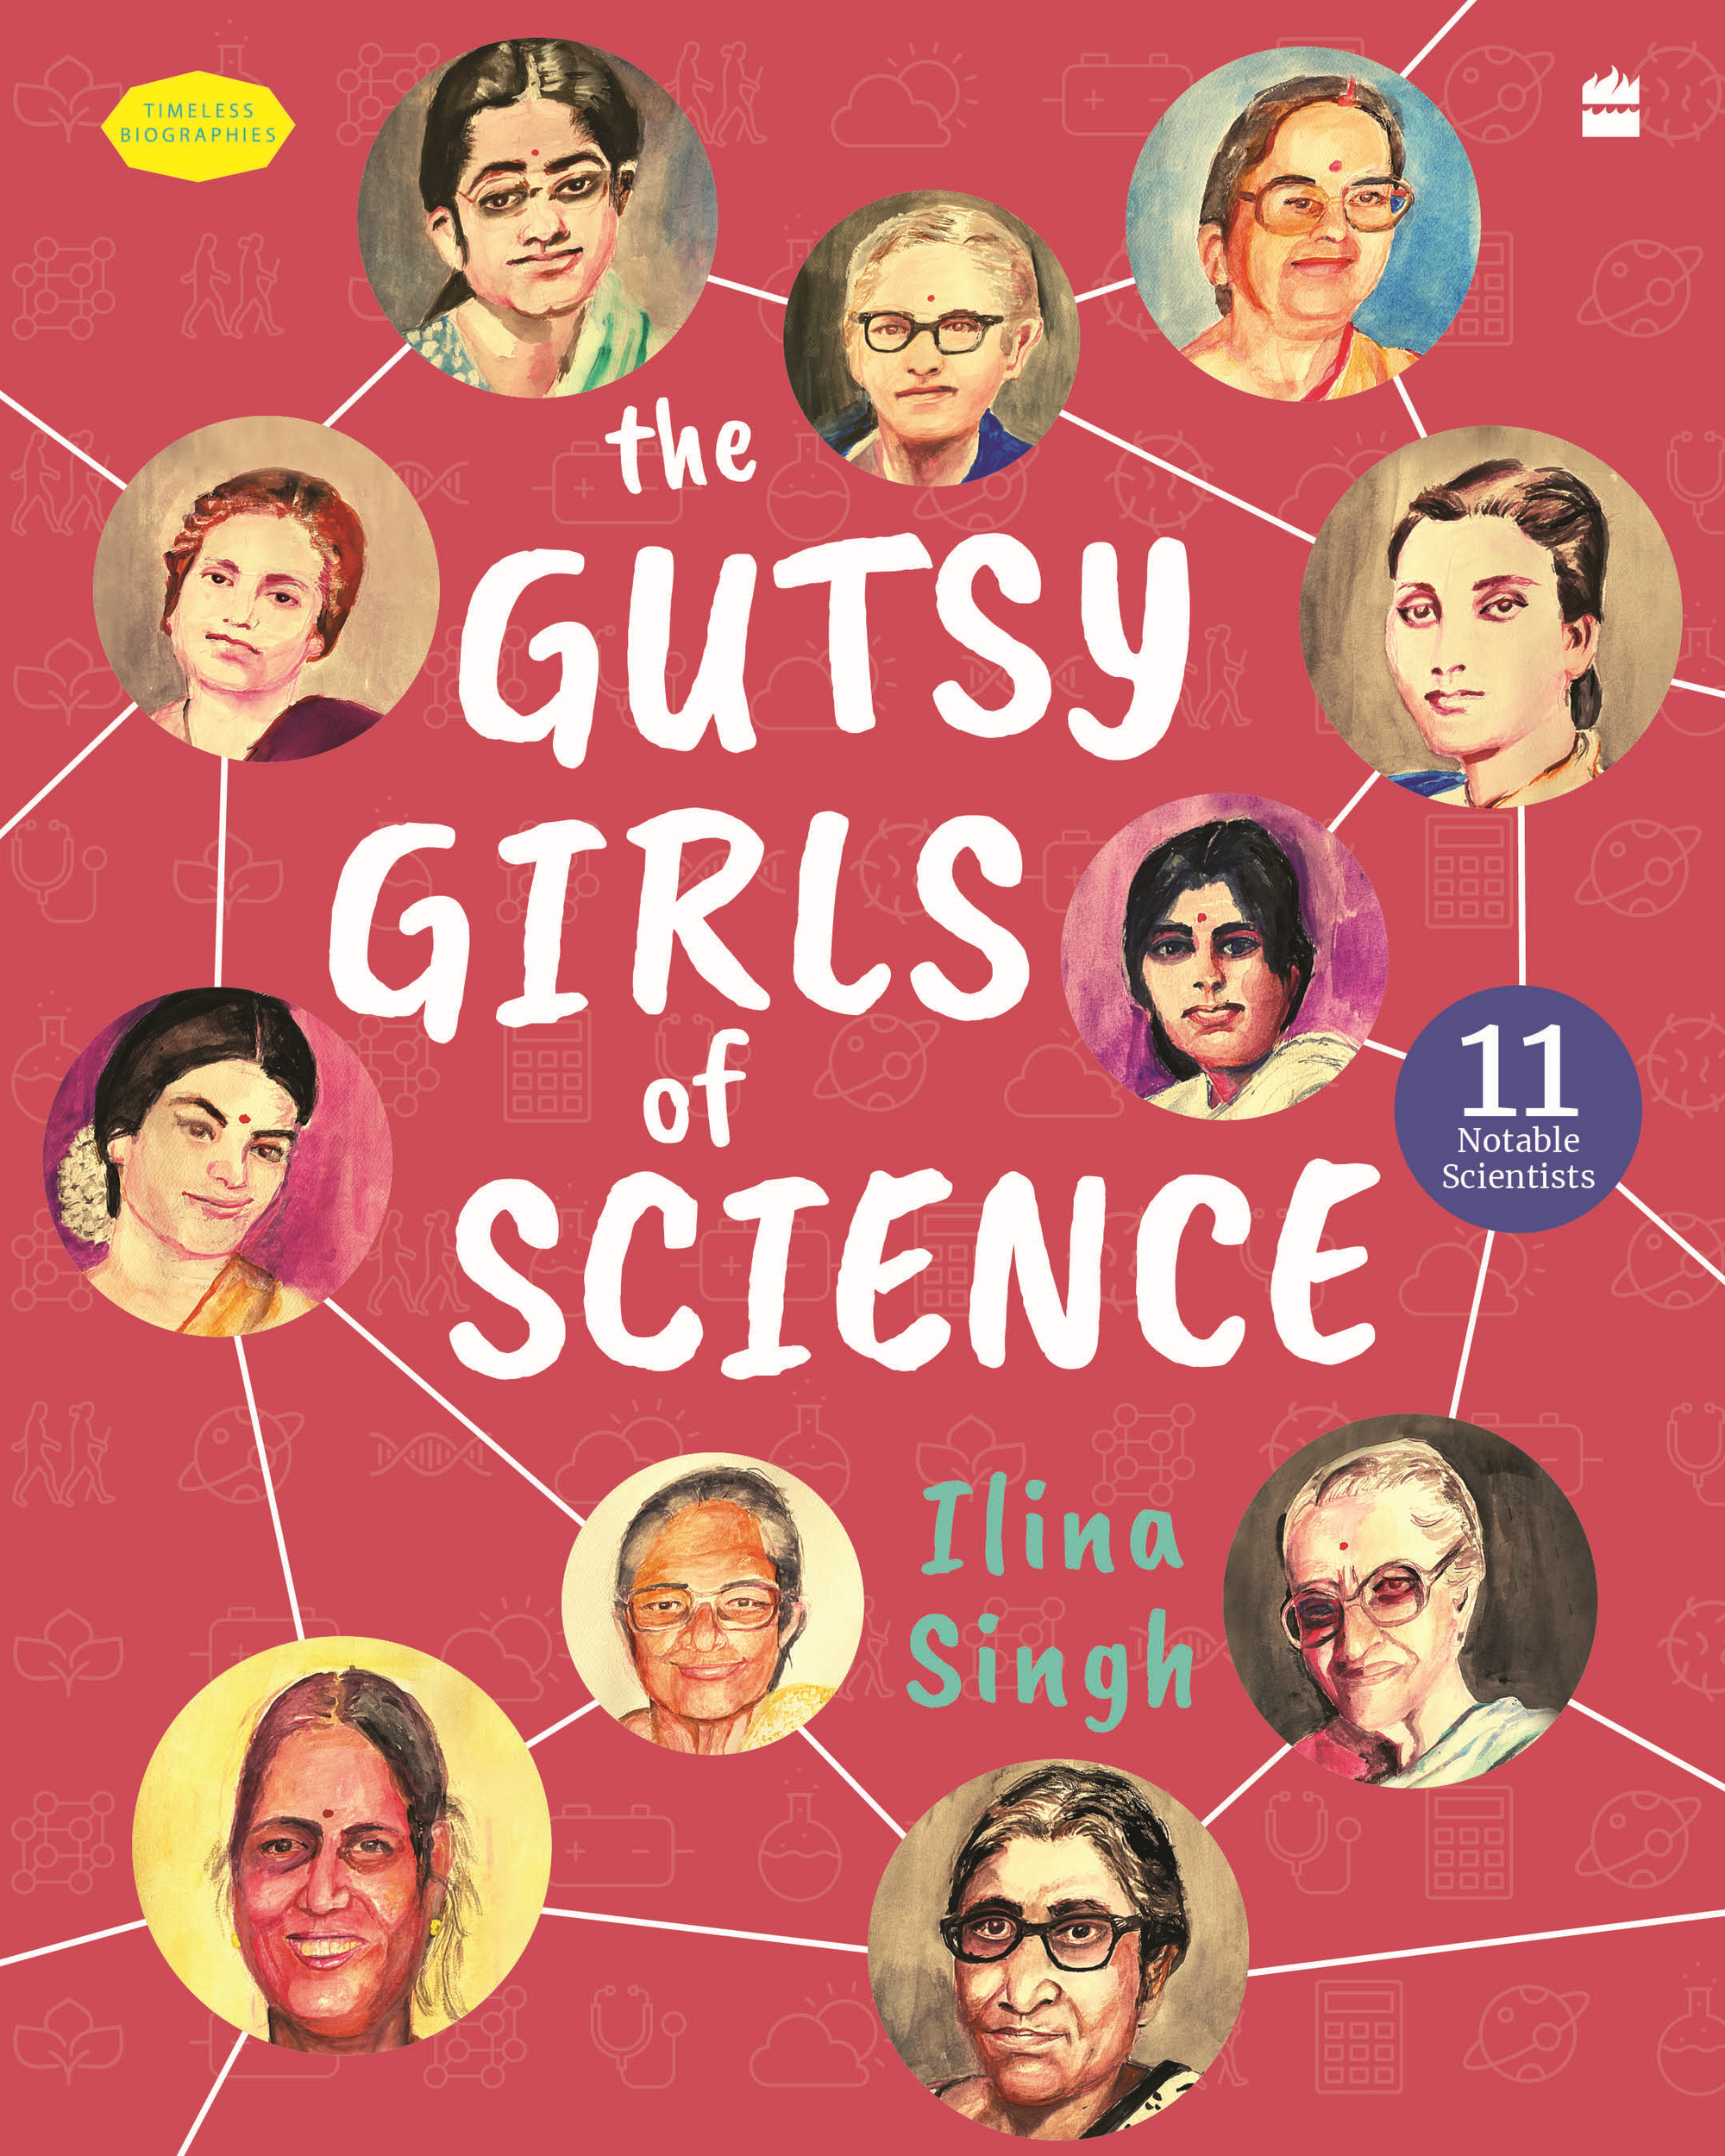 The Gutsy Girls Of Science by Ilina Singh